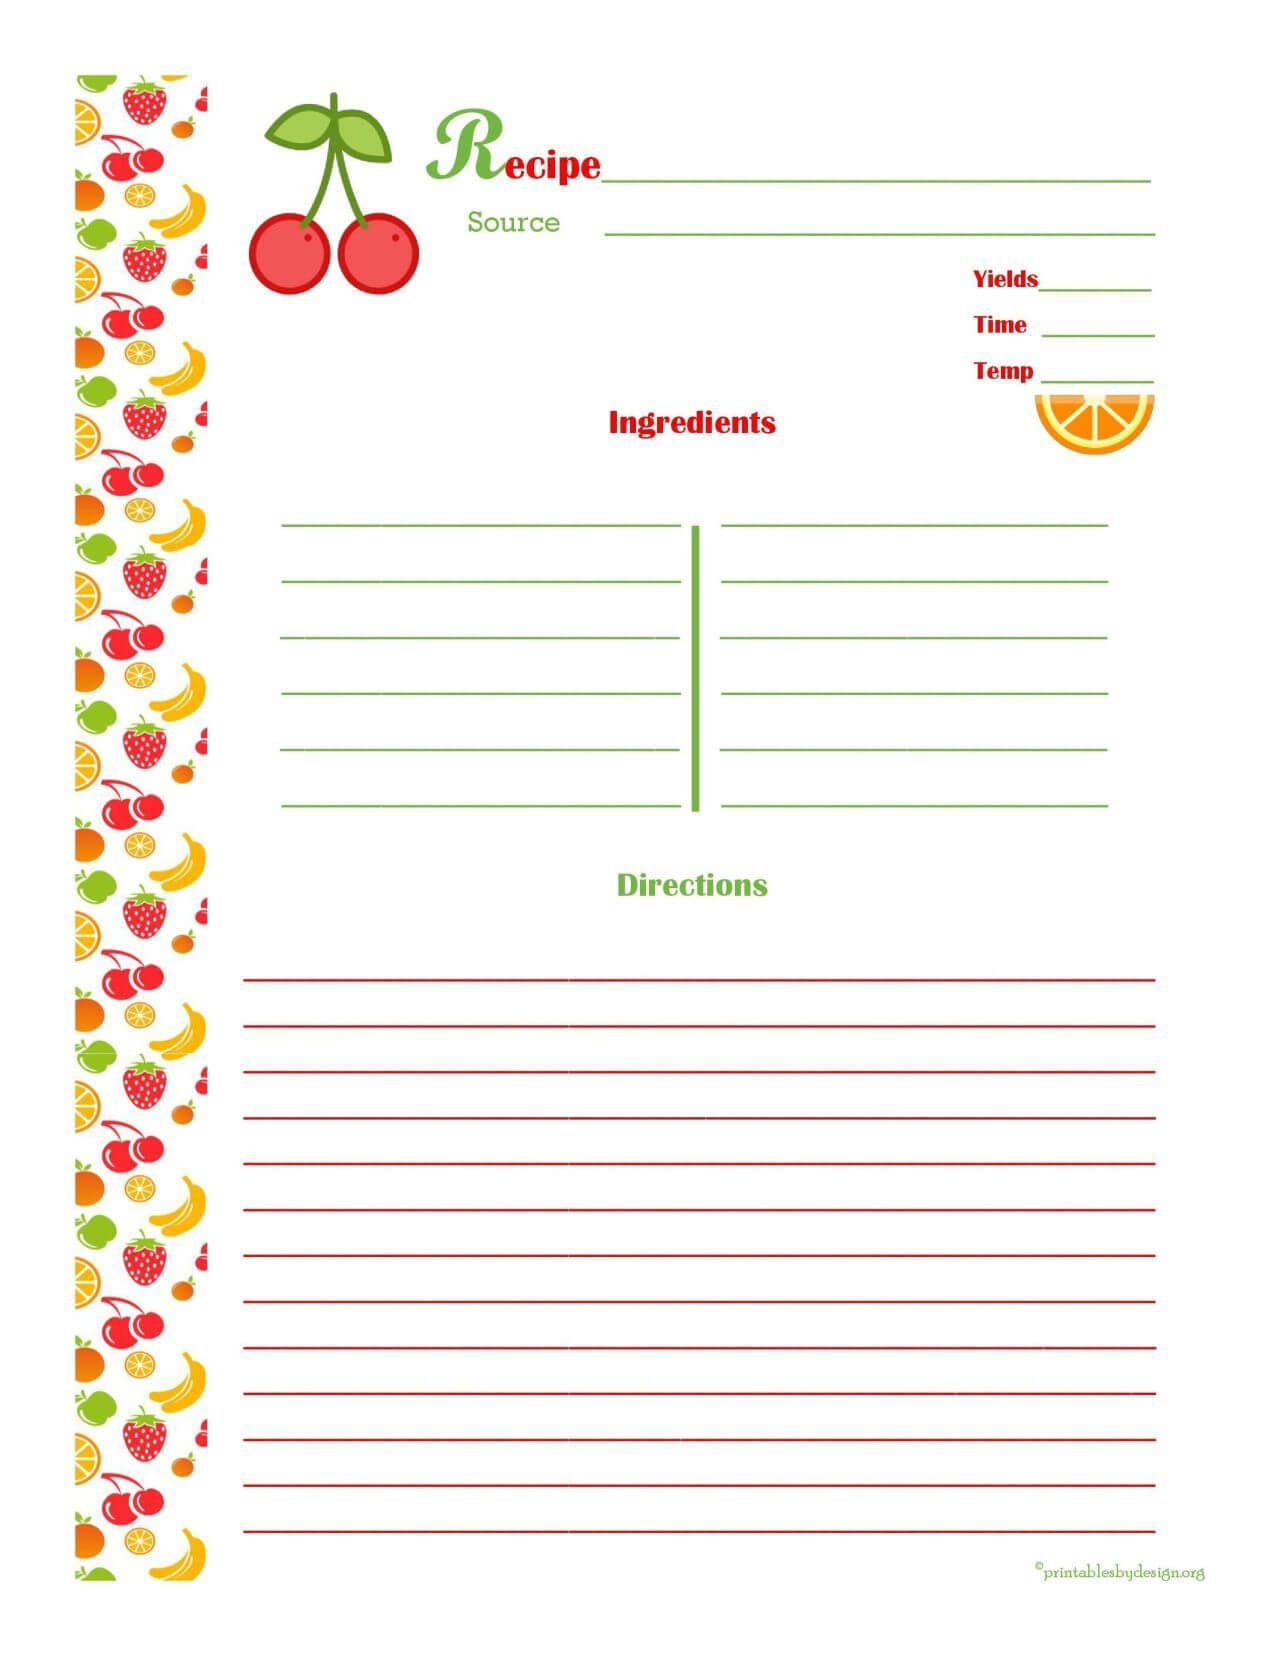 Free Editable Recipe Card Templates For Microsoft Word Within Free Recipe Card Templates For Microsoft Word